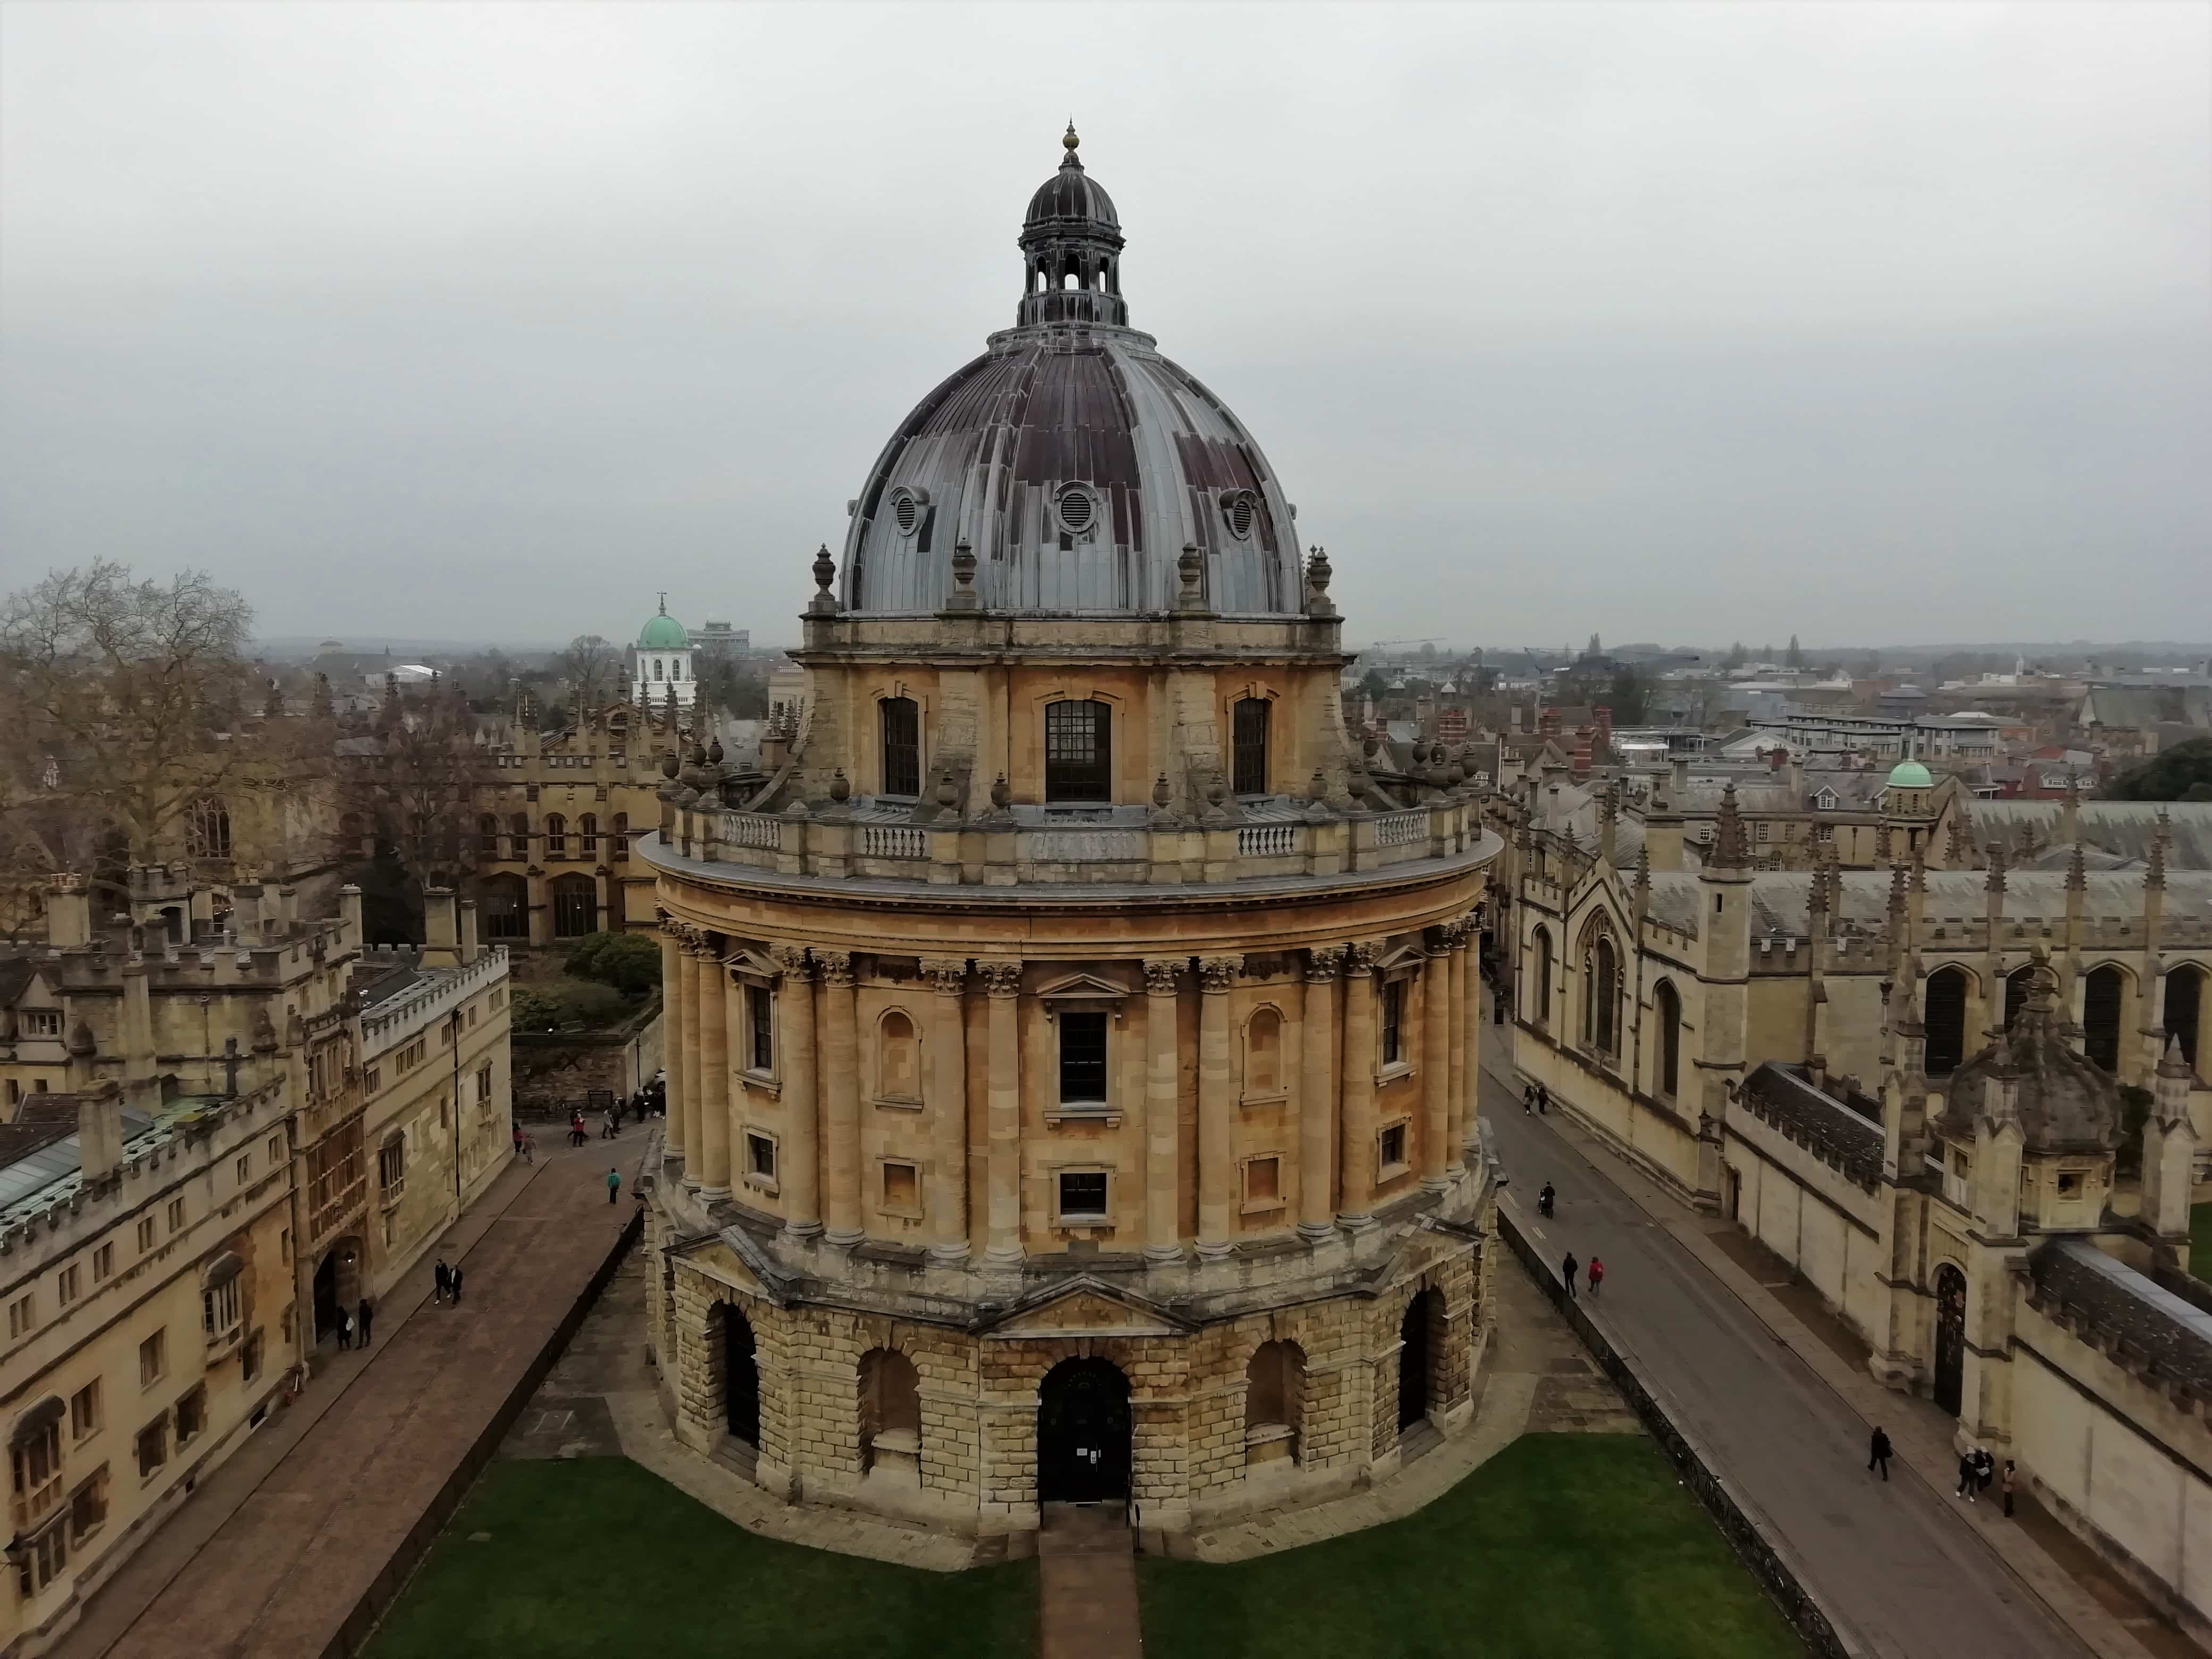 View of Radcliffe Camera from the University Church of St Mary the Virgin in Oxford